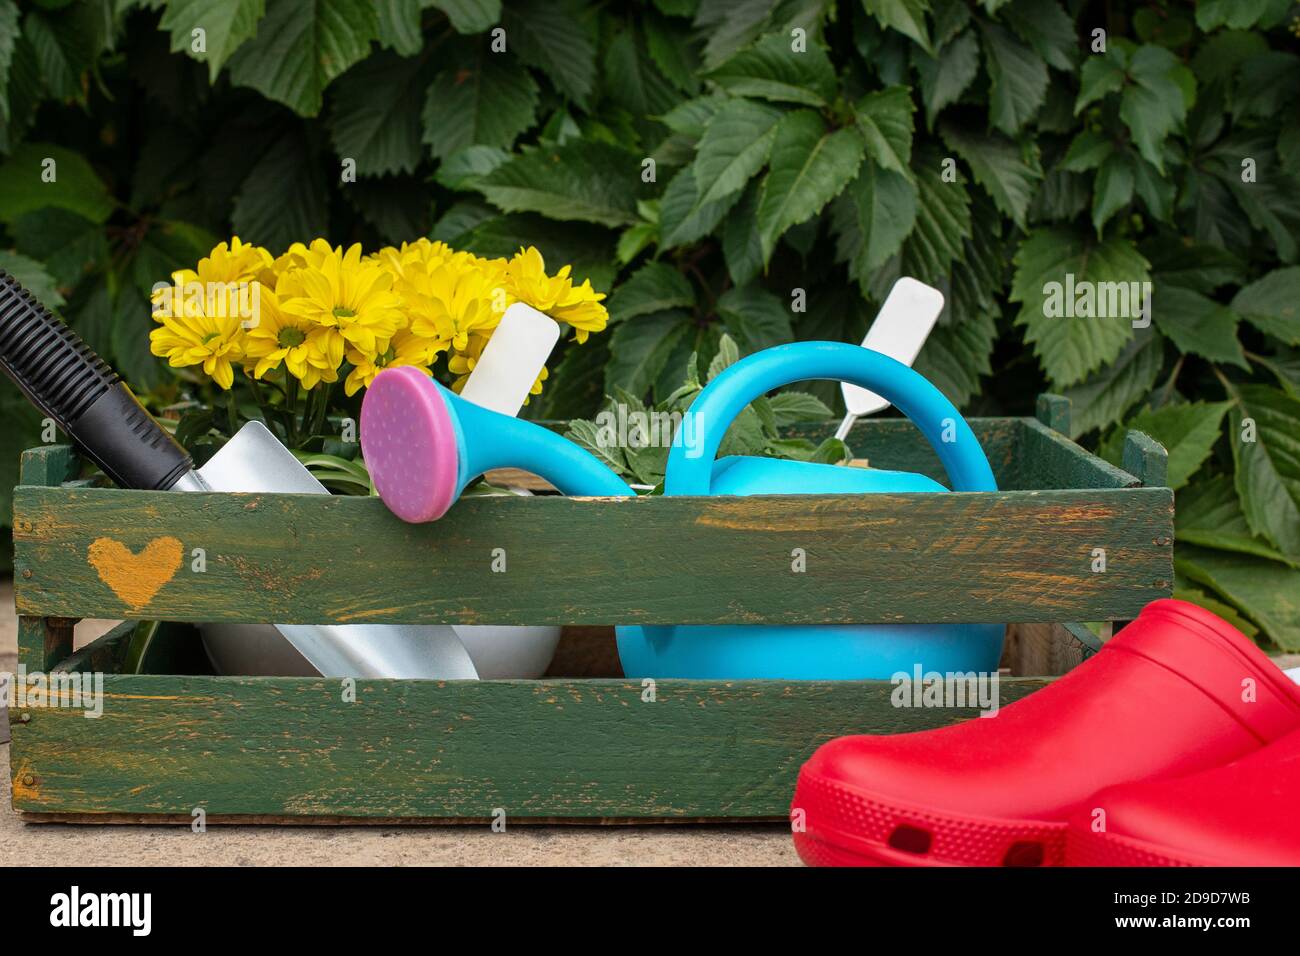 Gardening. work in the garden. tools, watering can and flower in a pot on a background of green leaves. Copy space. Wild grapes. Stock Photo